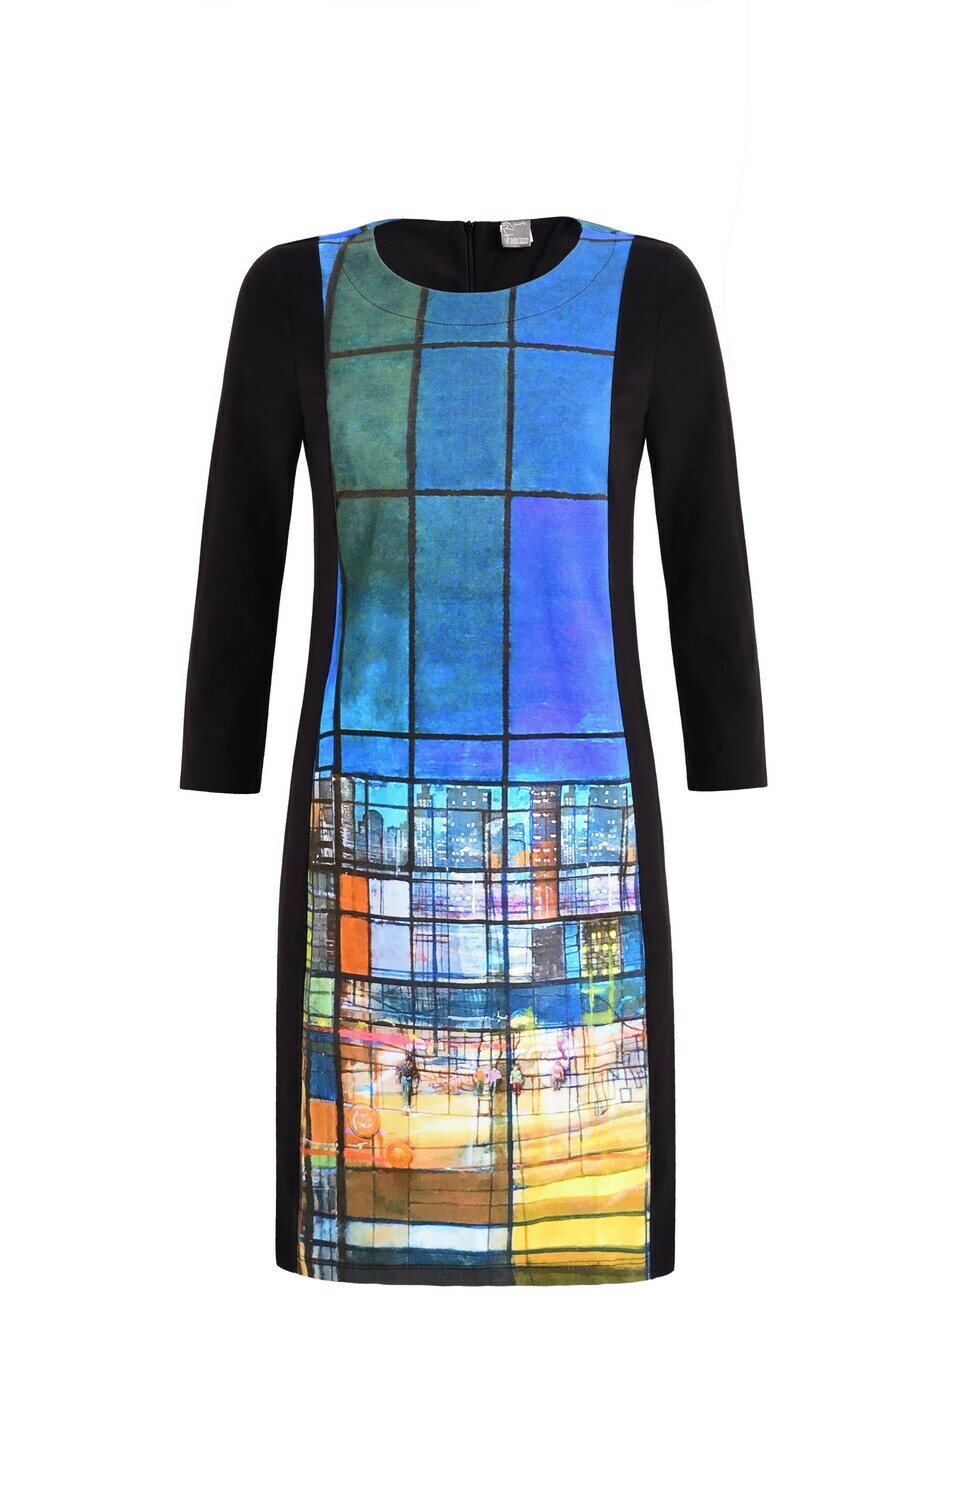 Simply Art Dolcezza: Colors Of Ville La Nuit Abstract Art Dress SOLD OUT